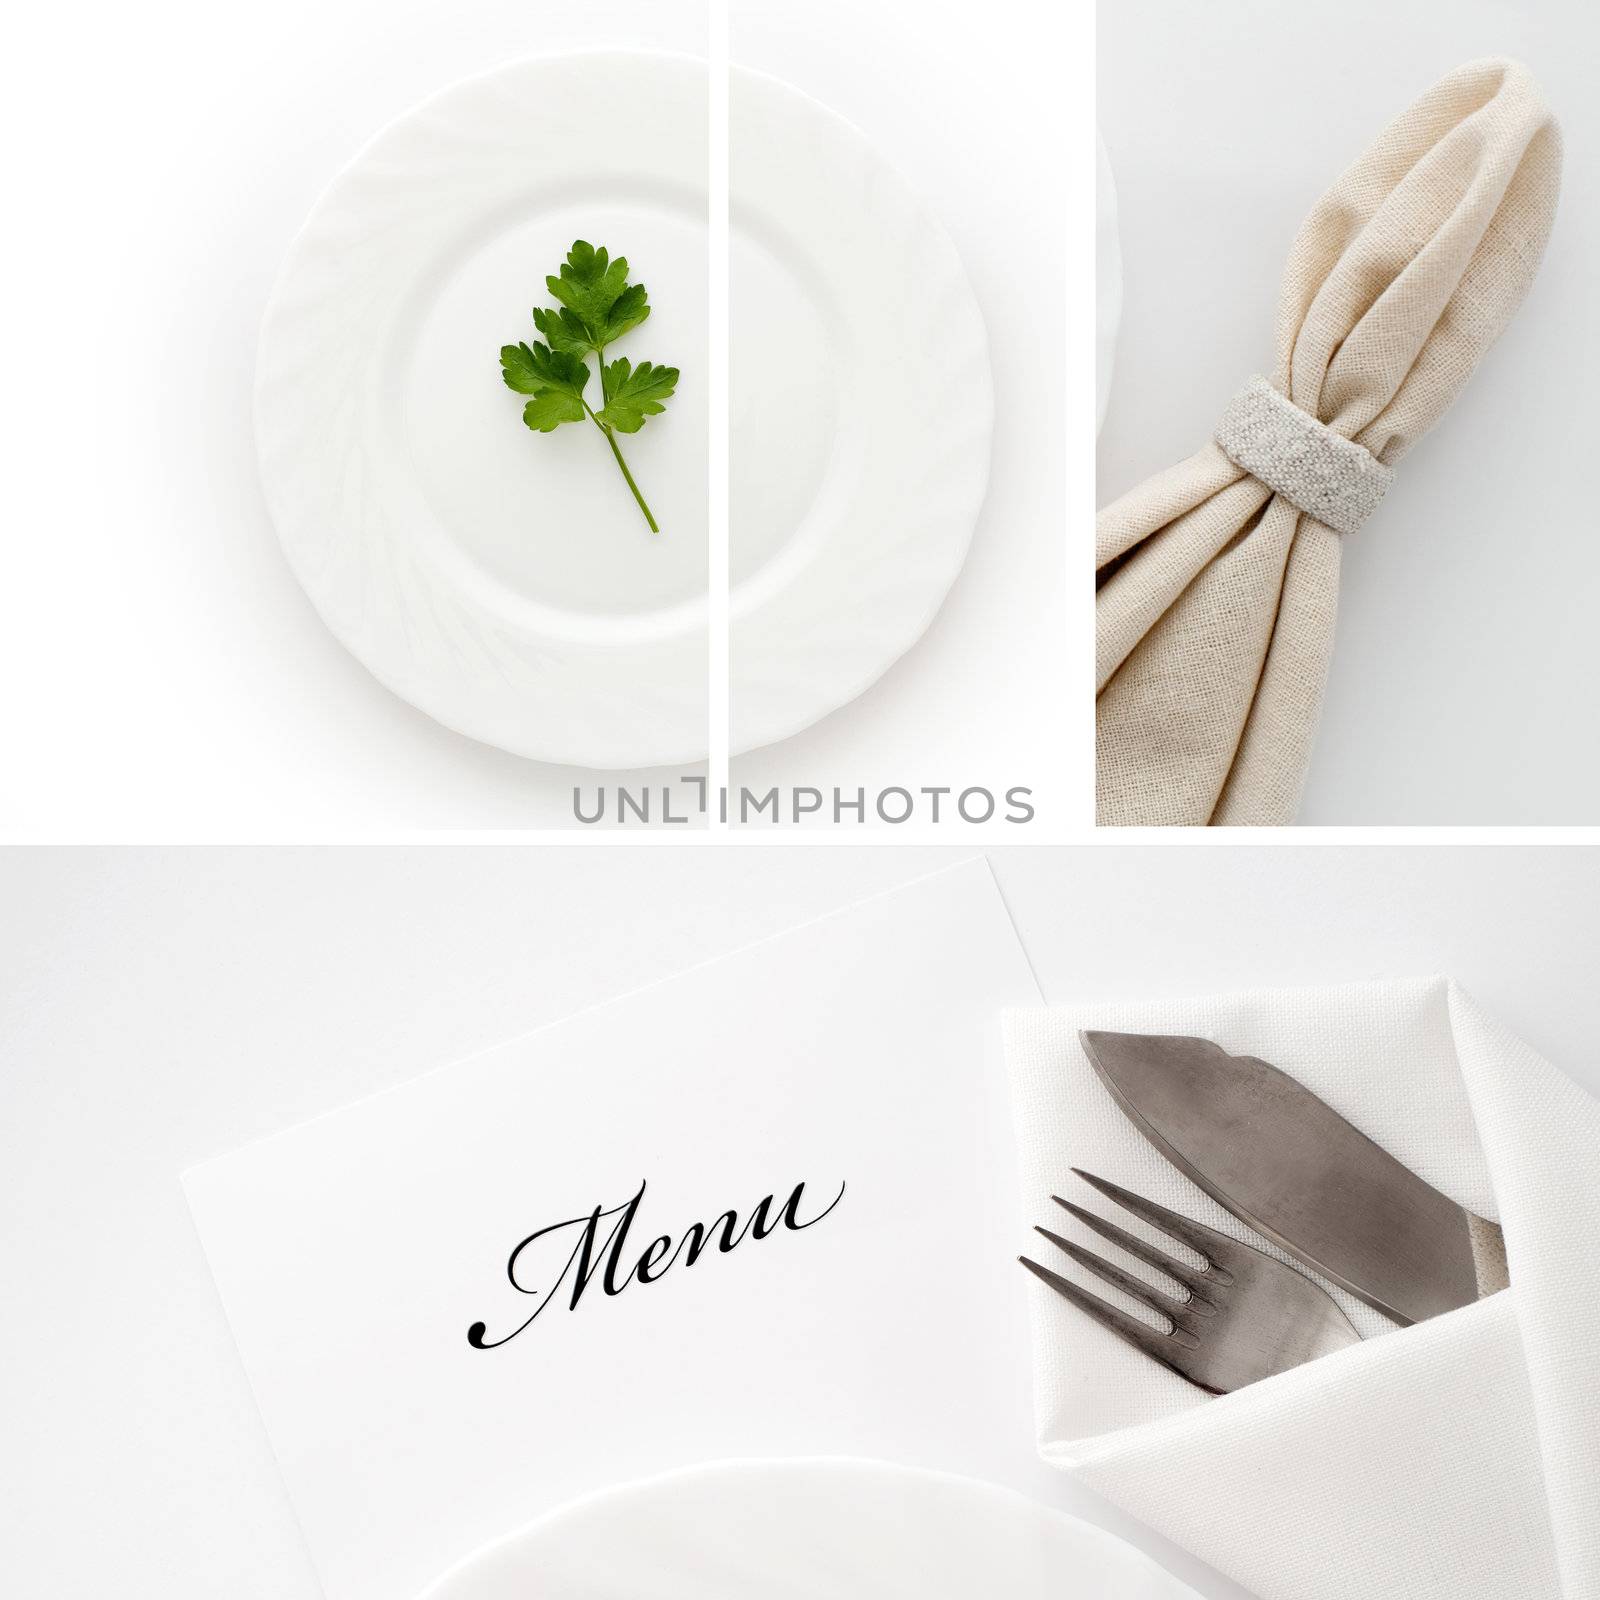 An image of a plate with parsley, napkin and silverwear 